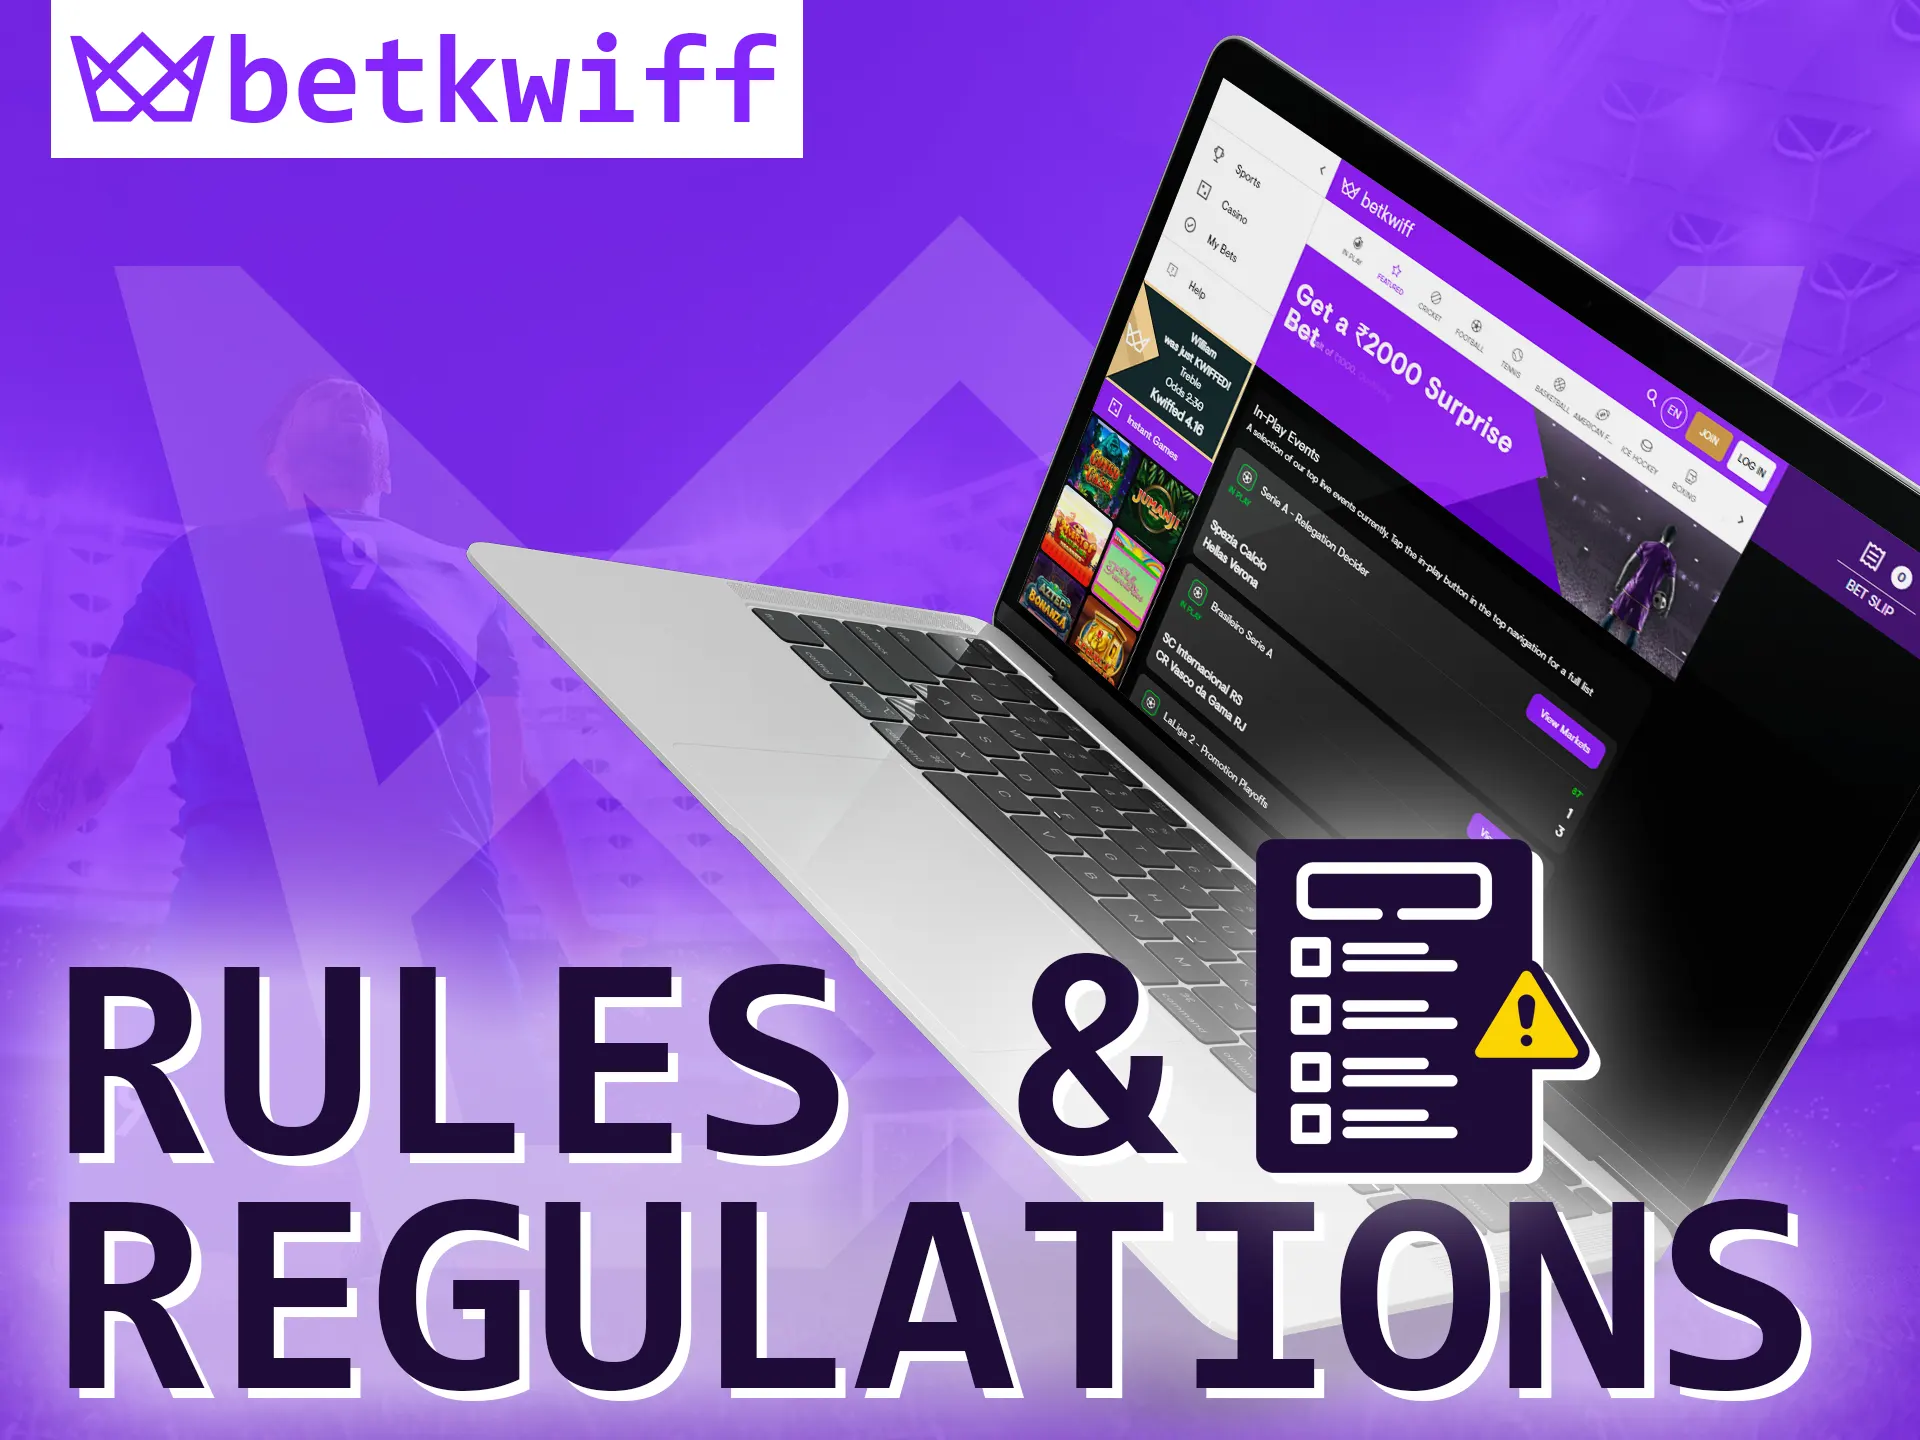 Betkwiff has simple rules, get to know them.